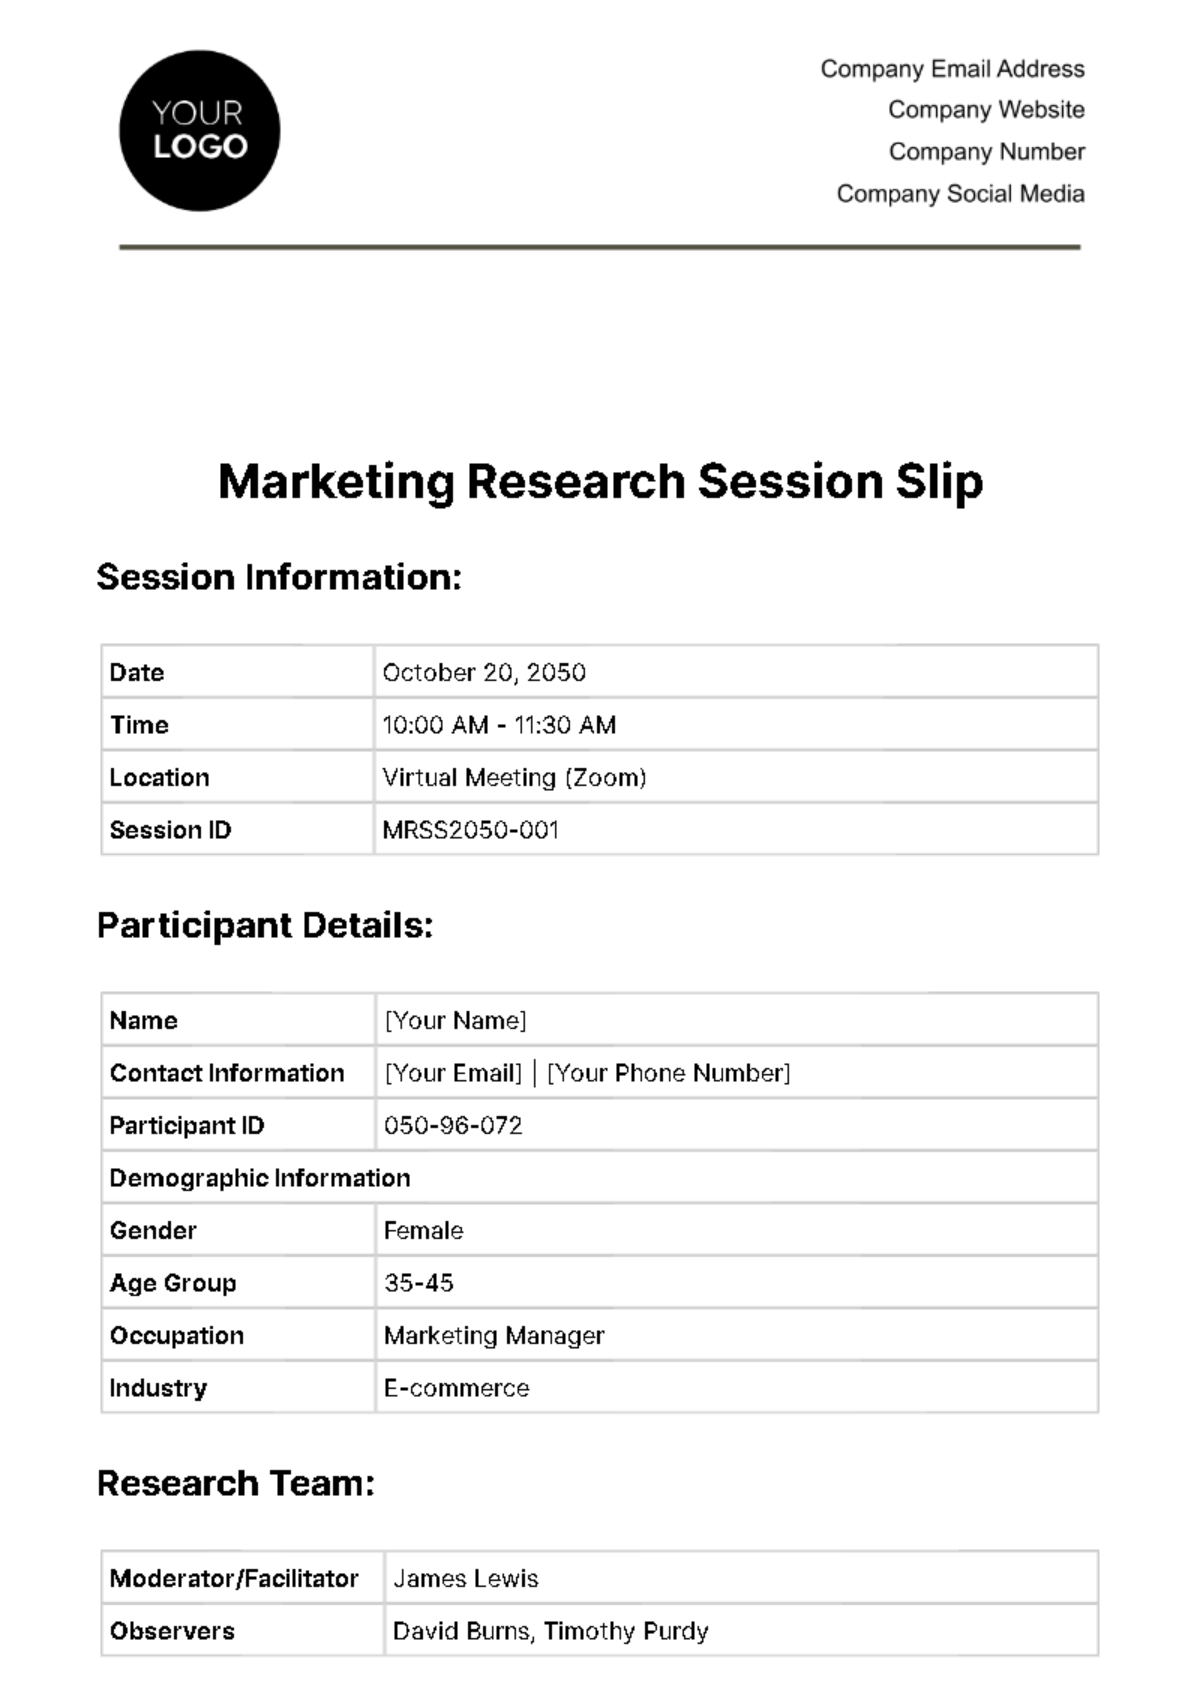 Free Marketing Research Session Slip Template